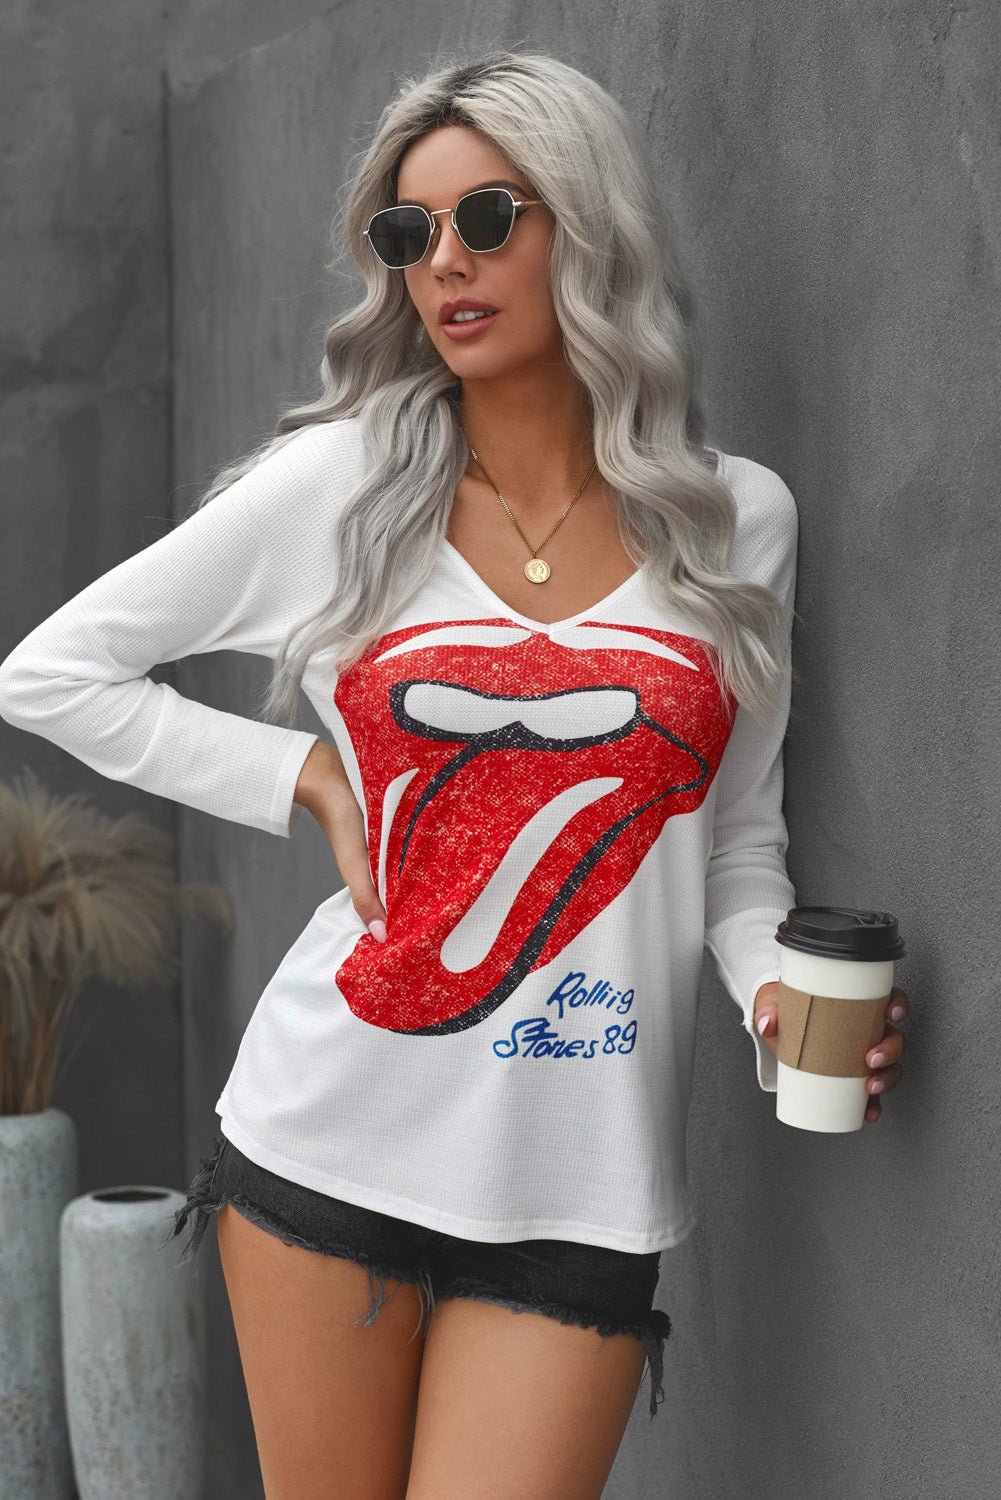 Lips Graphic T-Shirt - V-neck - Womens Long Sleeve - Casual Style -#Firefly Lane Boutique1